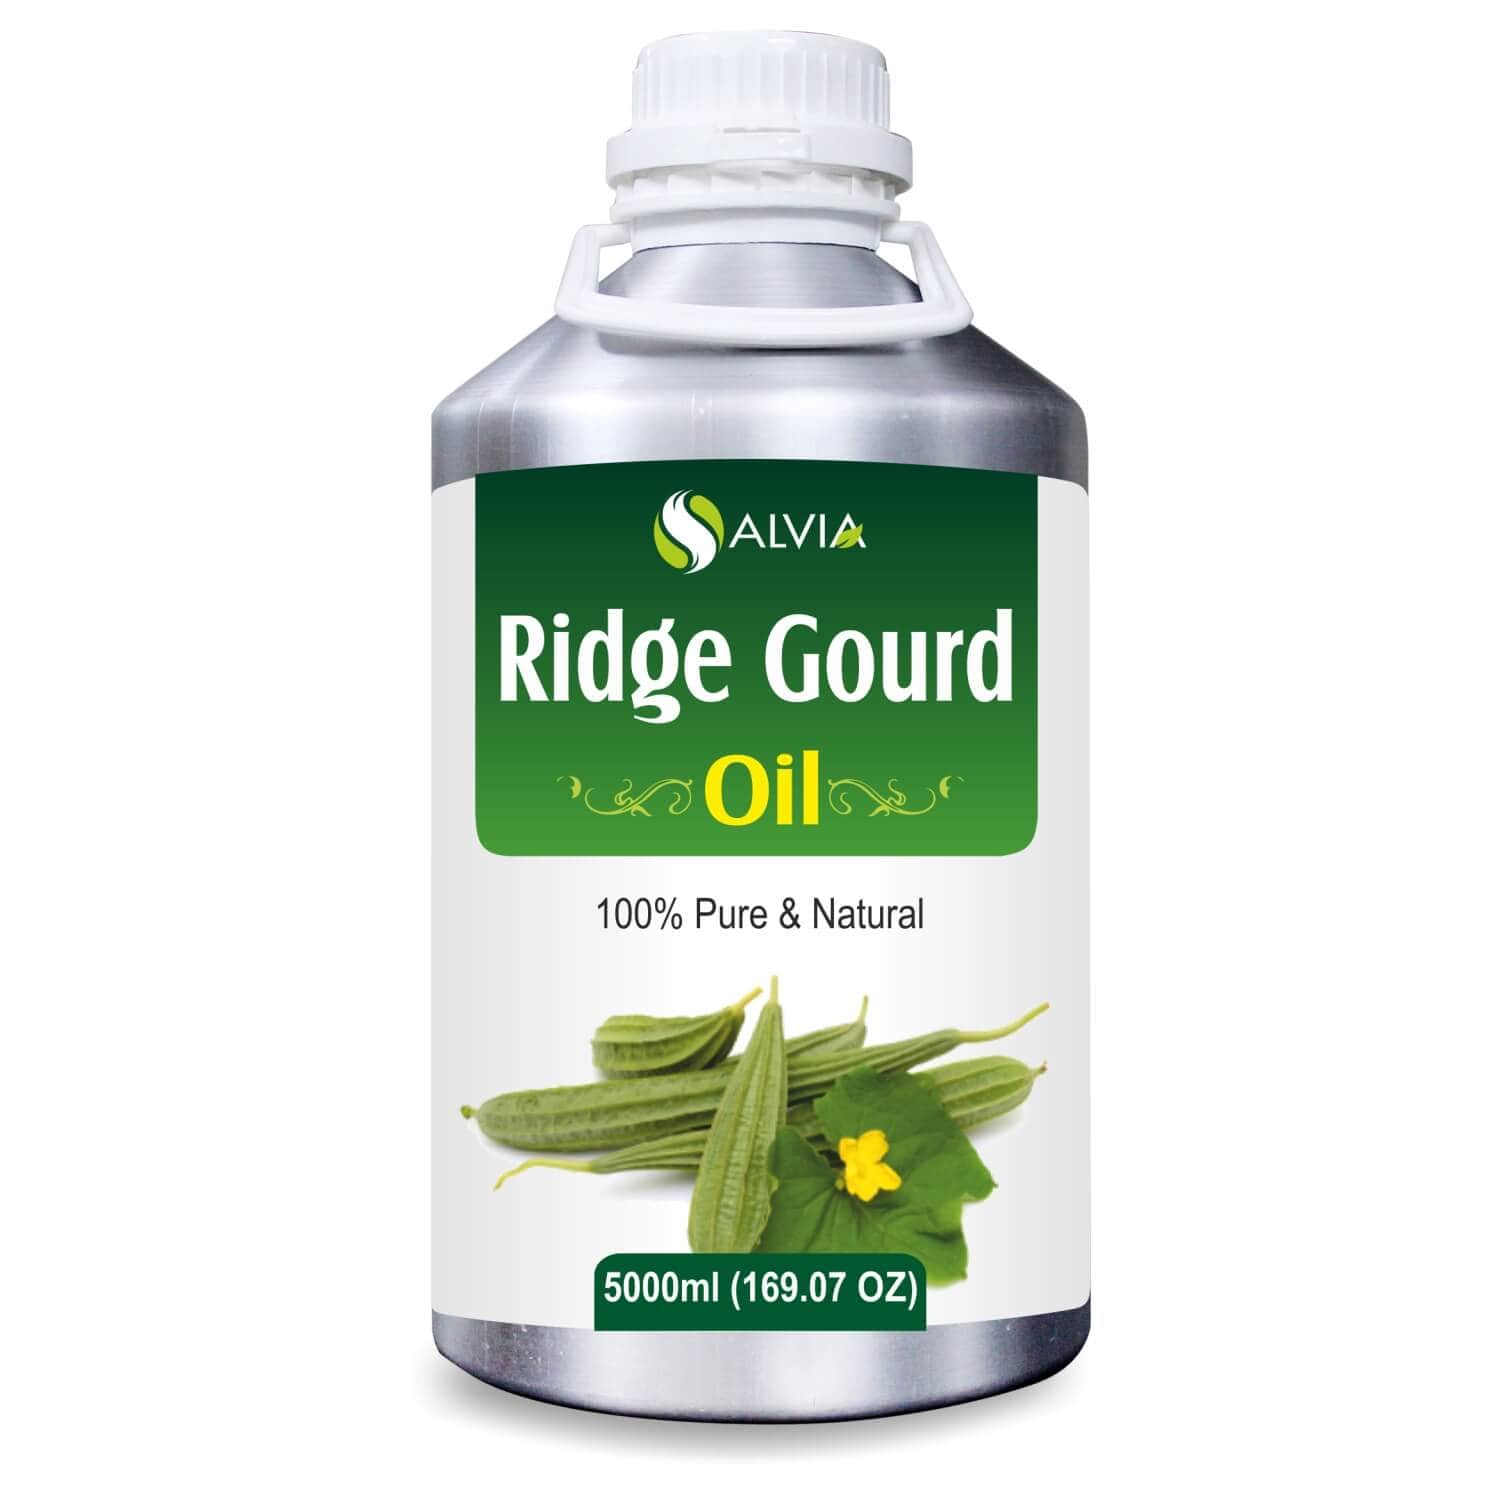 Salvia Natural Carrier Oils 5000ml Ridge Gourd Oil (Lufa Acutangula) Pure Natural Cold Pressed Carrier Oil Therapeutic Grade For Hair Care, Nourishes Skin & More